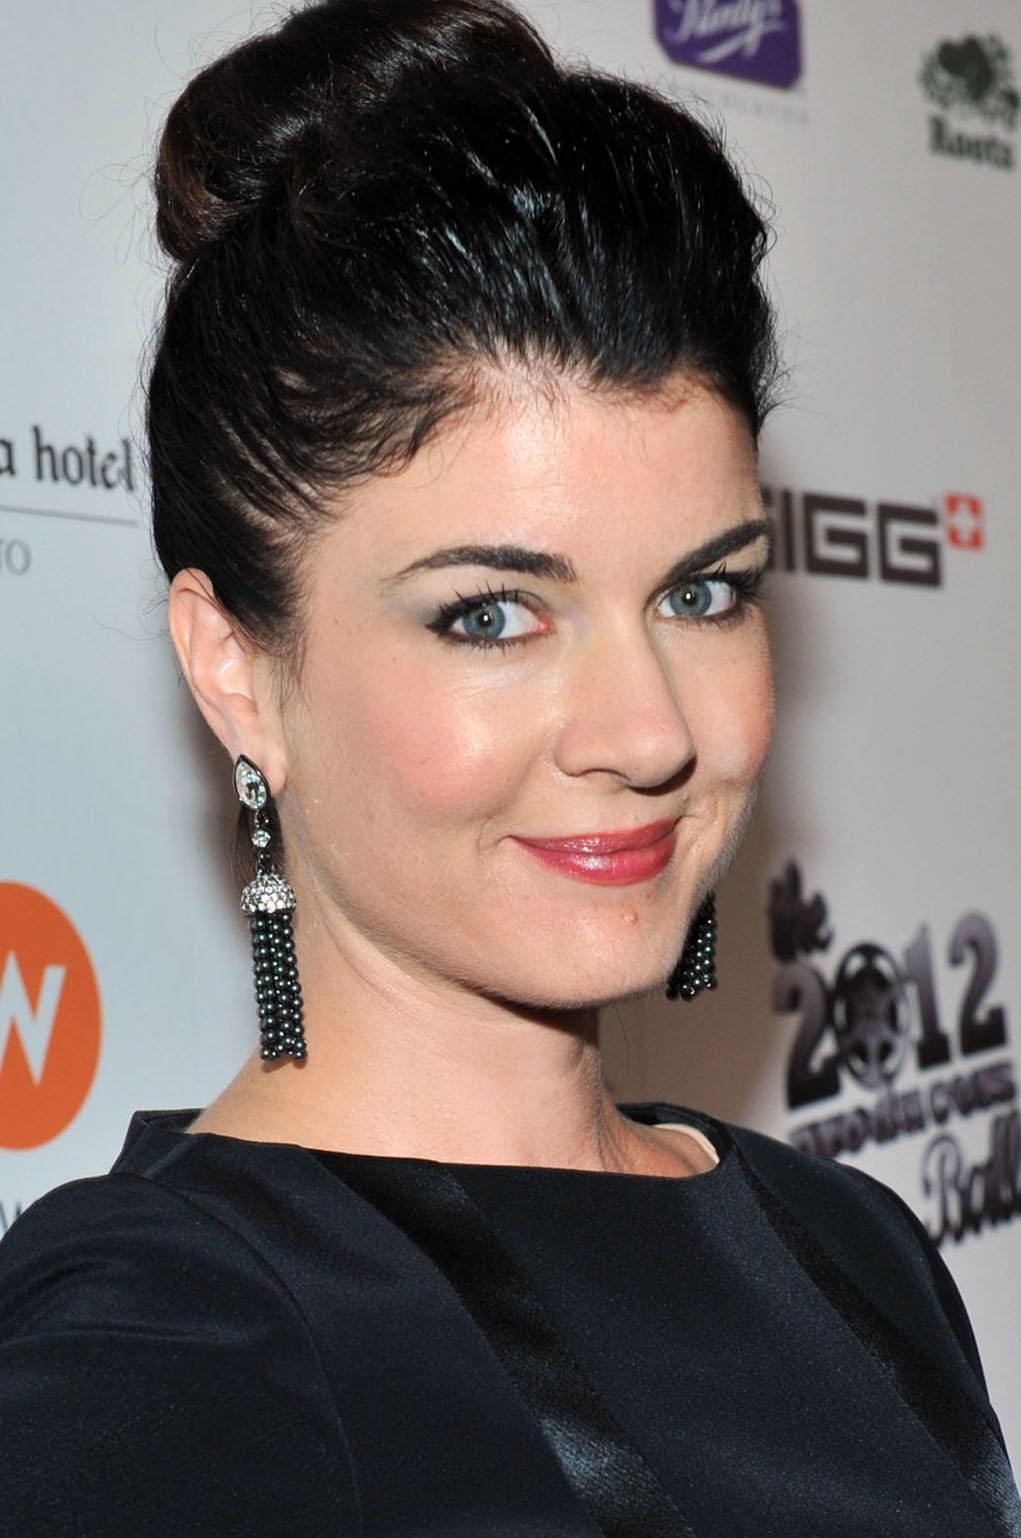 70+ Hot Pictures Of Gabrielle Miller Are Here To Take Your Breath Away 362